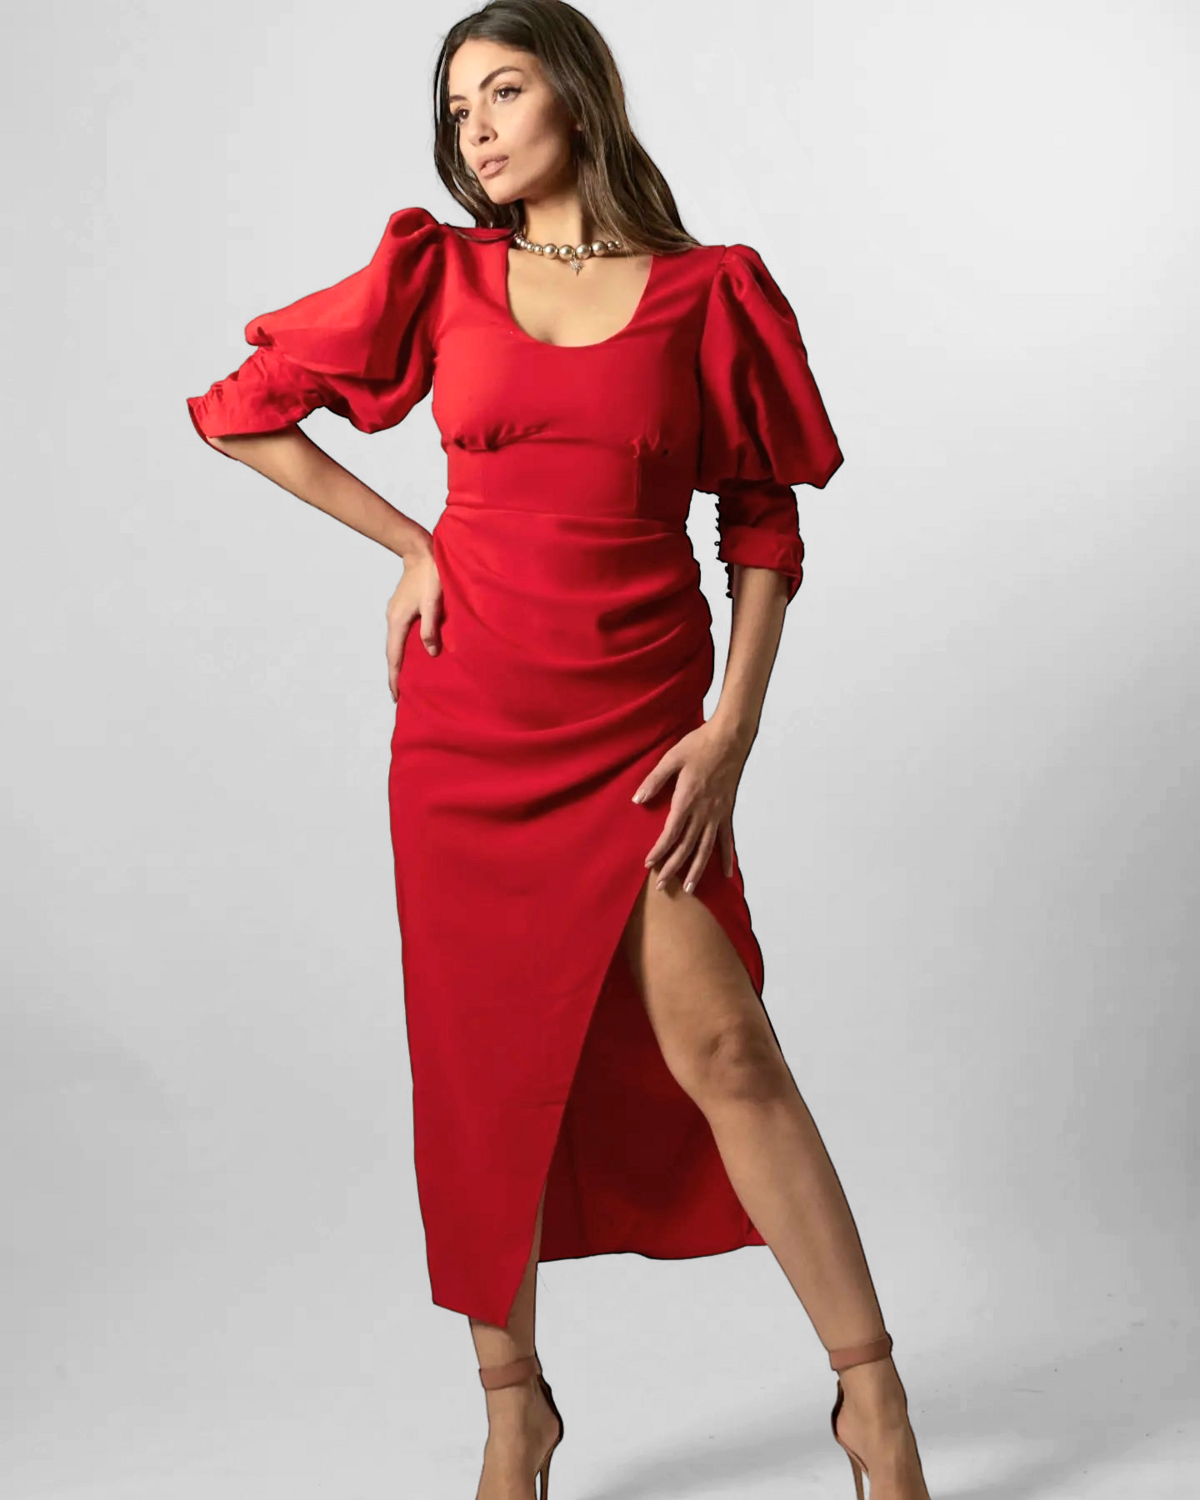 "Lady in Red" dress